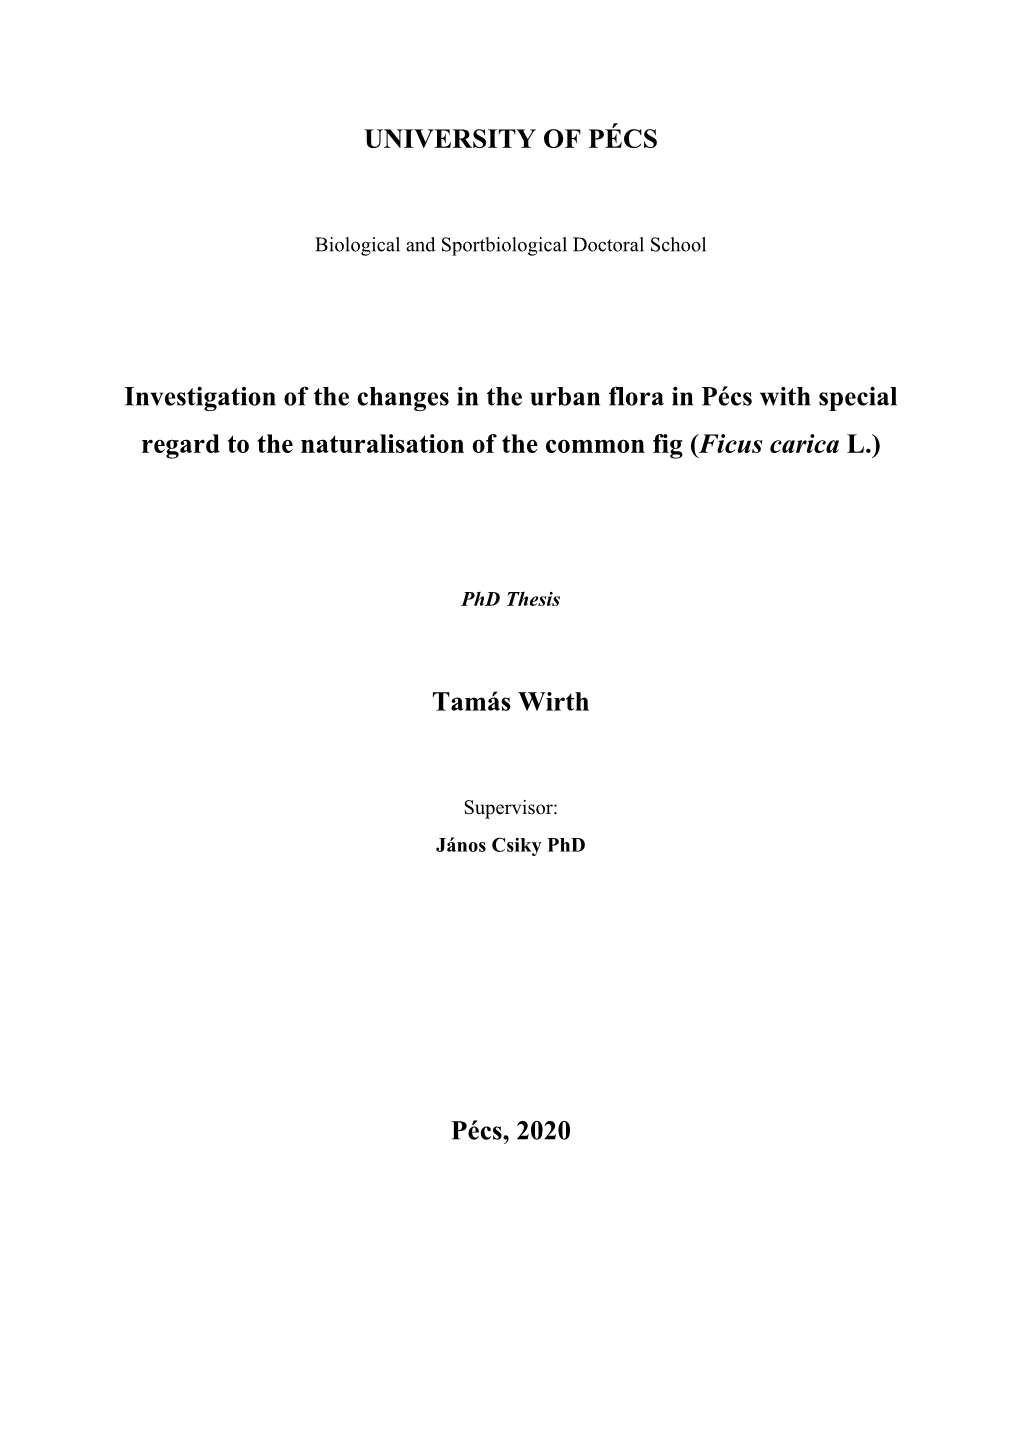 UNIVERSITY of PÉCS Investigation of the Changes in the Urban Flora In